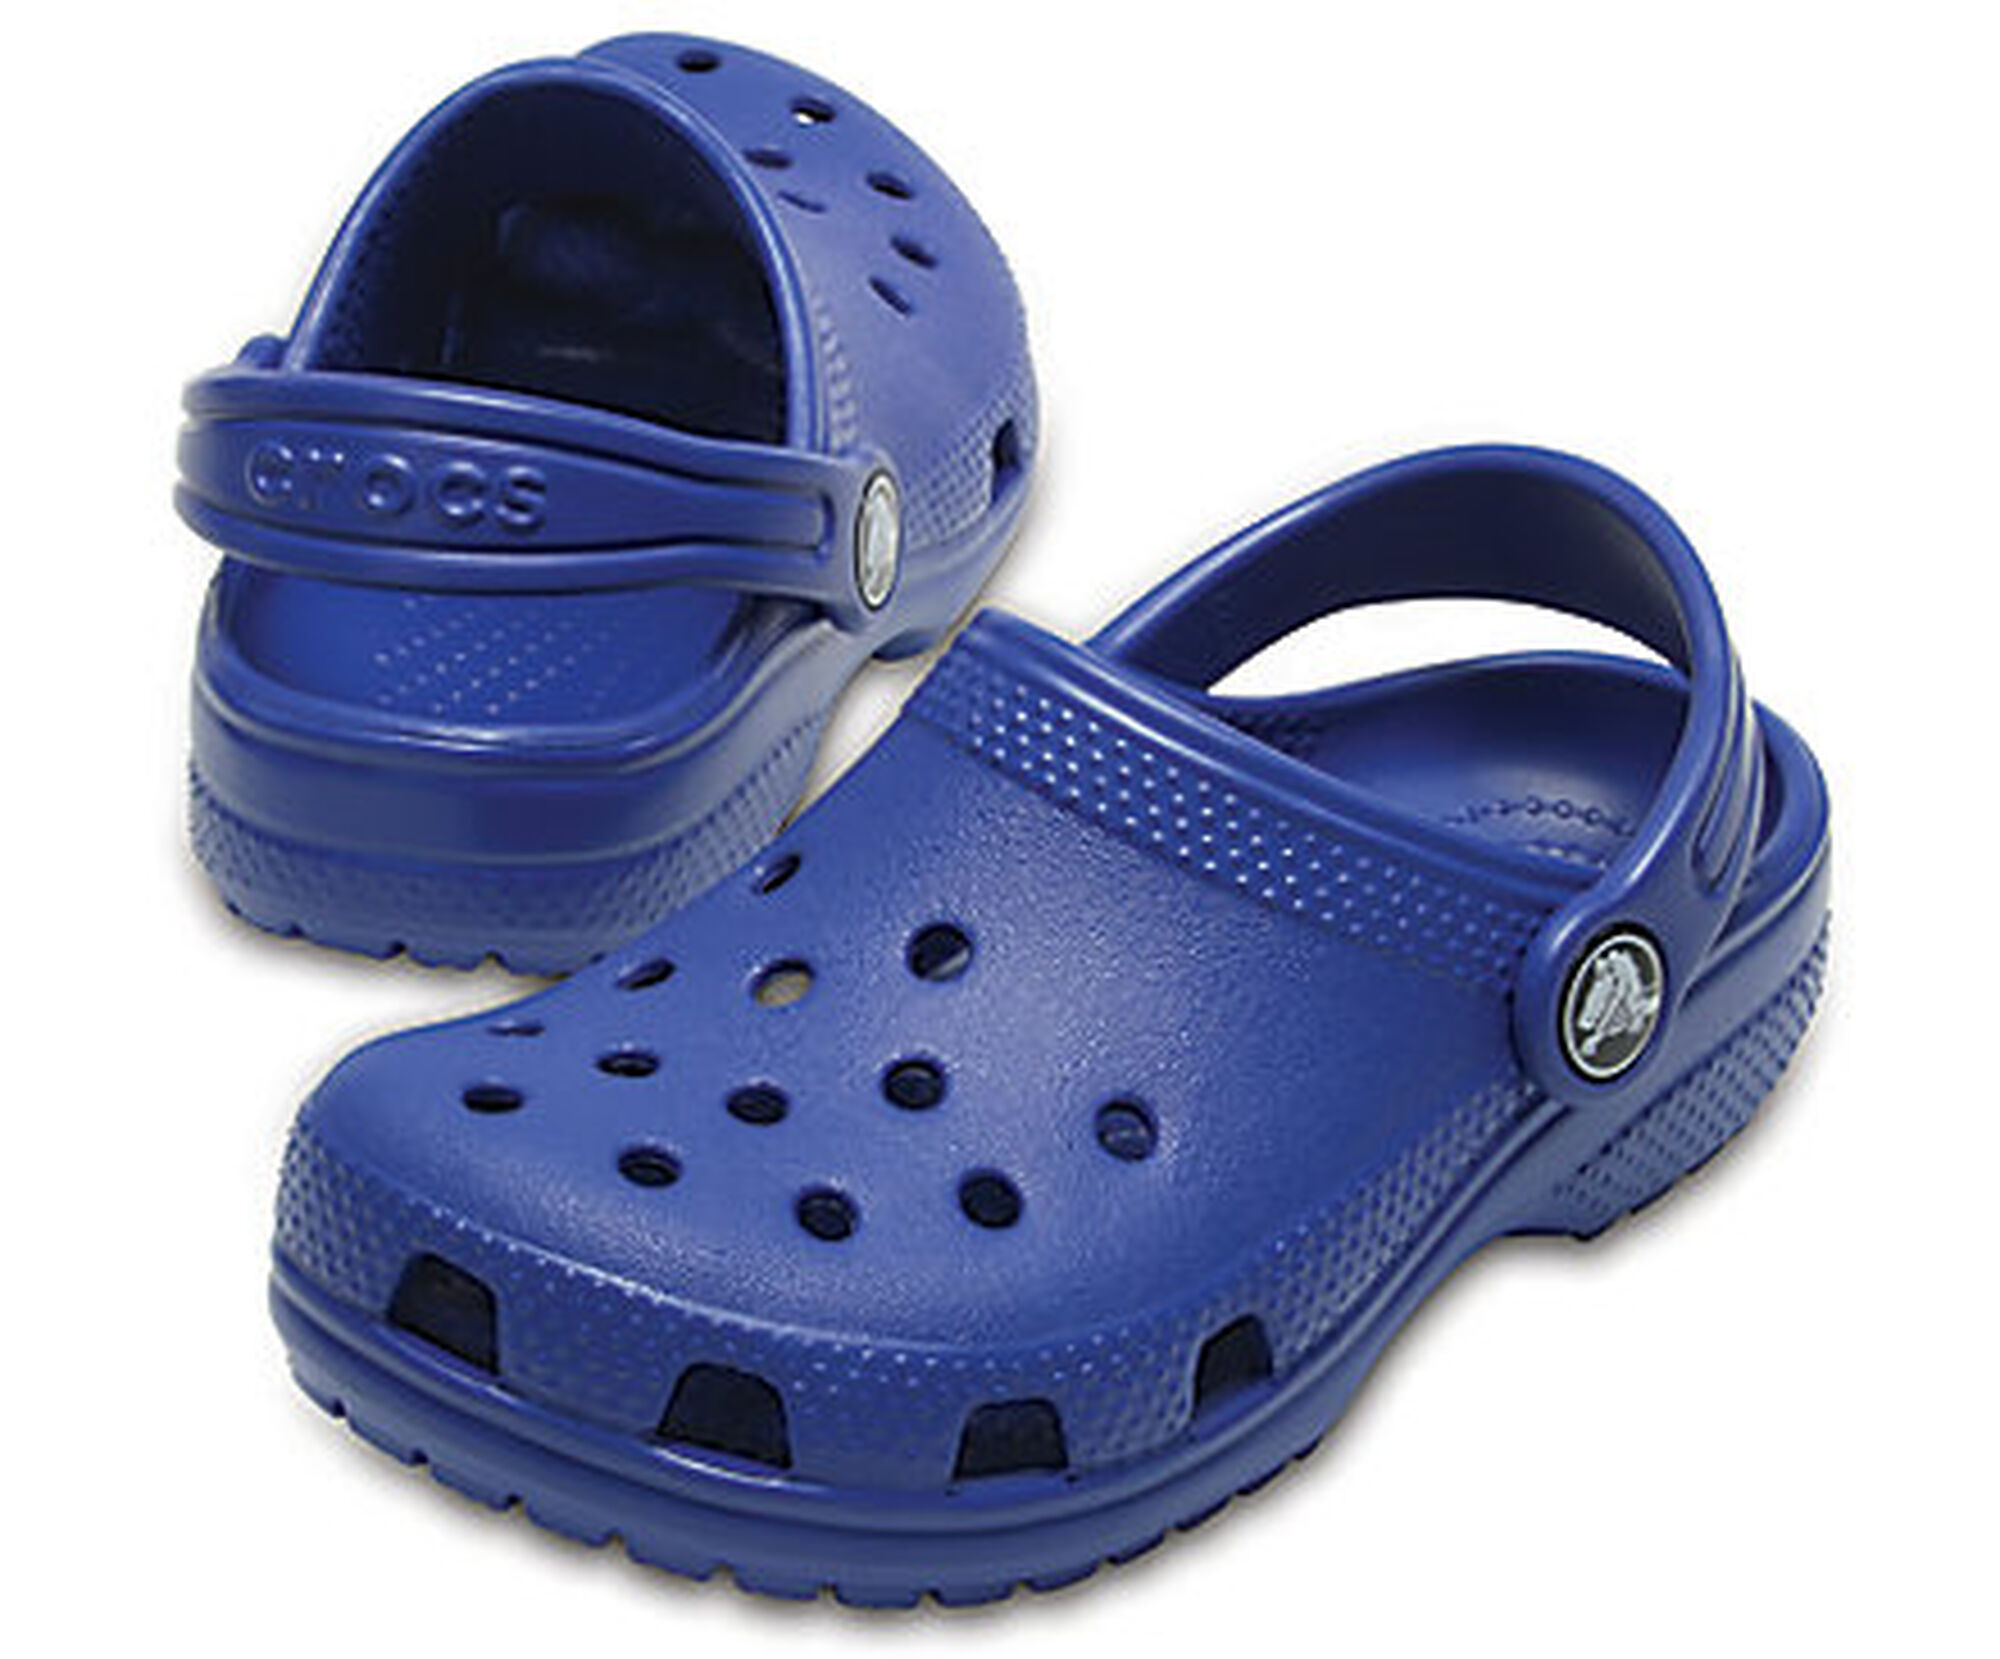 Crocs Clearance Extra 50% Off – Shoes for the Family Starting at ONLY $11